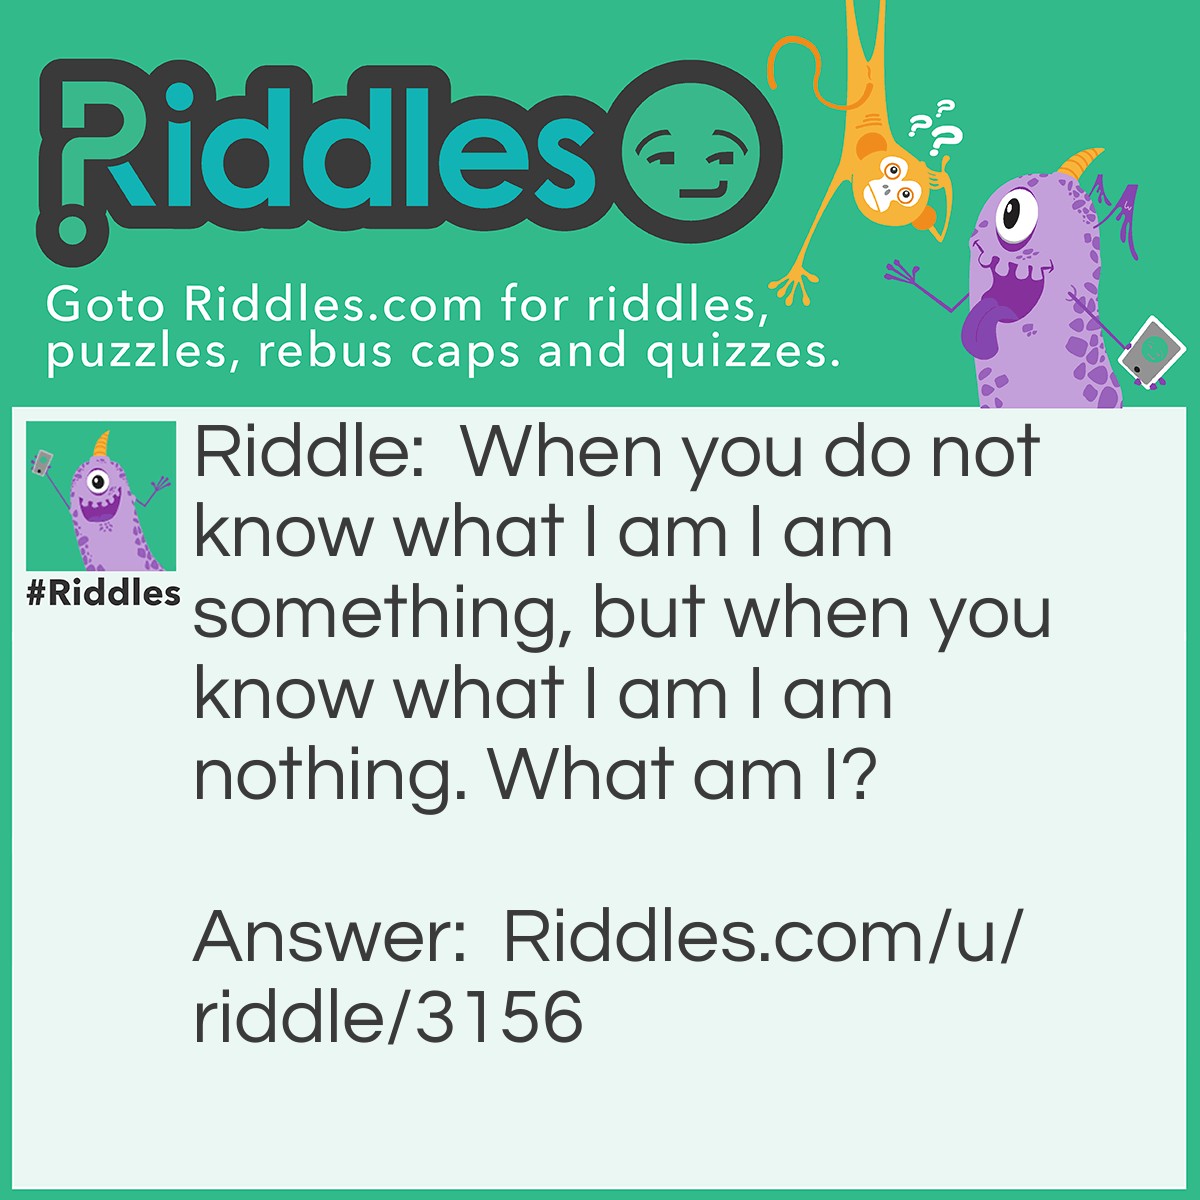 Riddle: When you do not know what I am I am something, but when you know what I am I am nothing. What am I? Answer: A riddle.